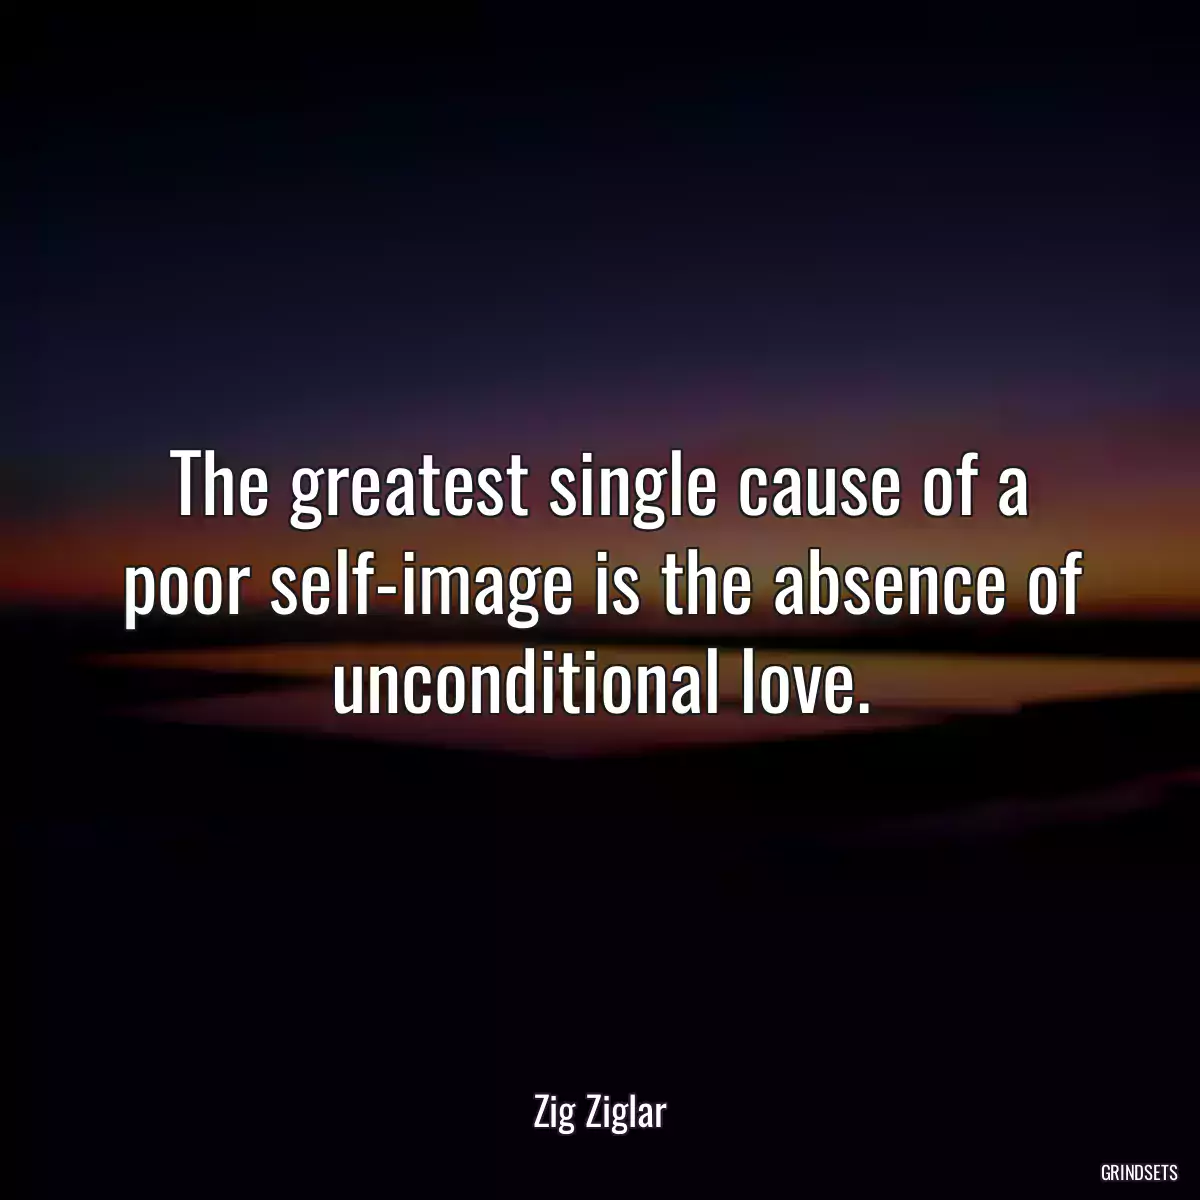 The greatest single cause of a poor self-image is the absence of unconditional love.